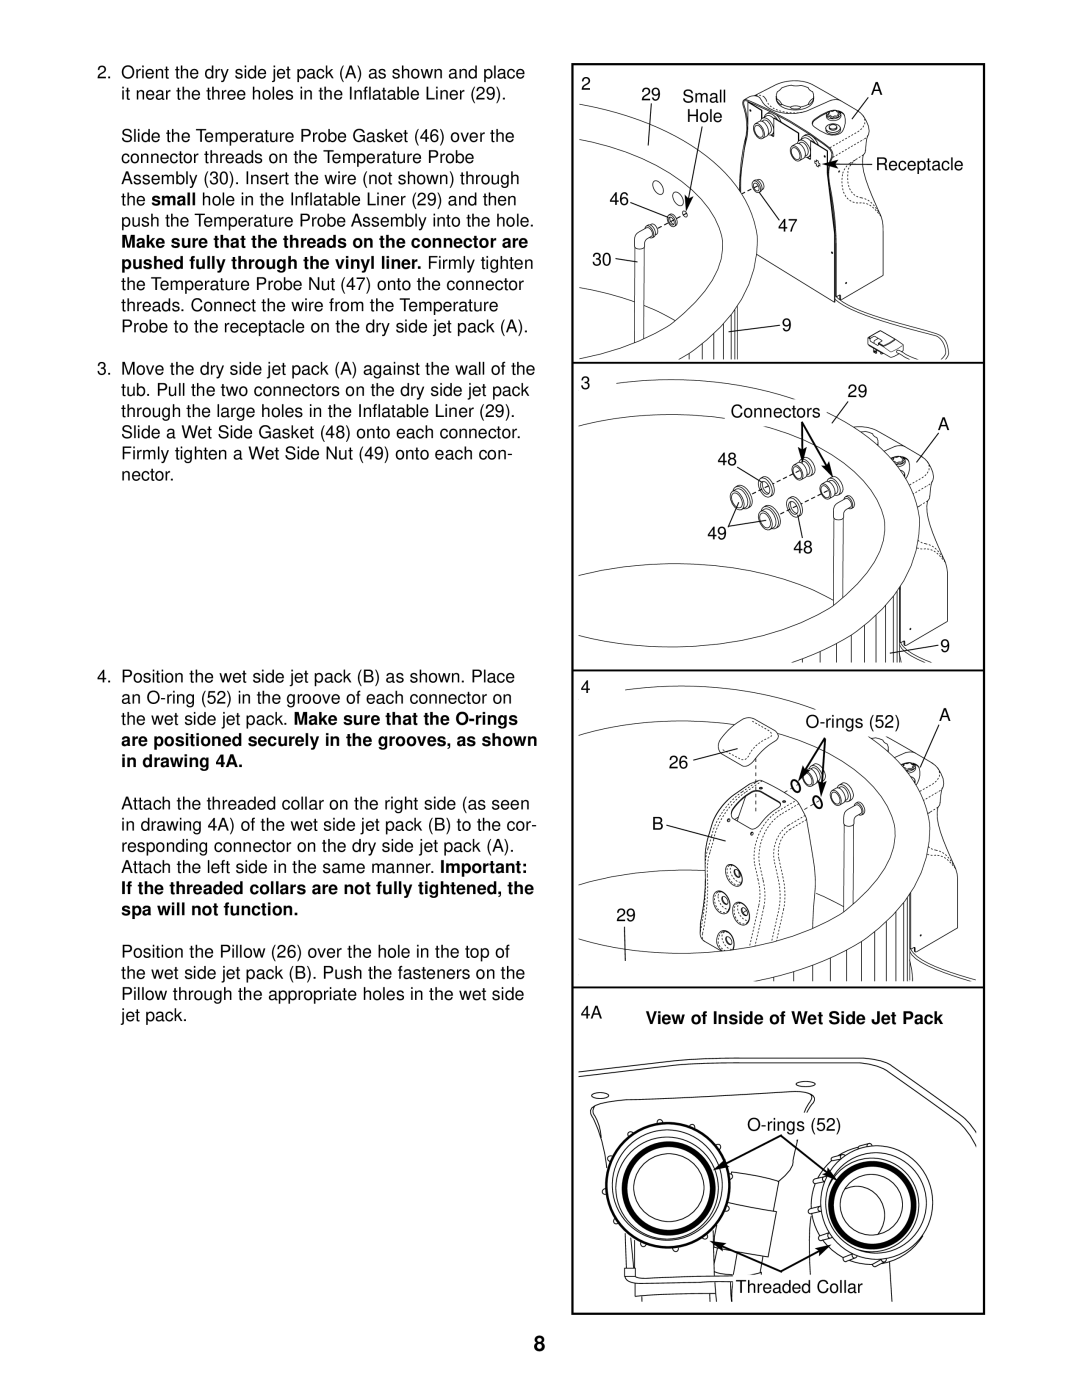 Image 831.10815 user manual pushed fully through the vinyl liner, in drawing 4A, Make sure that the O-rings 